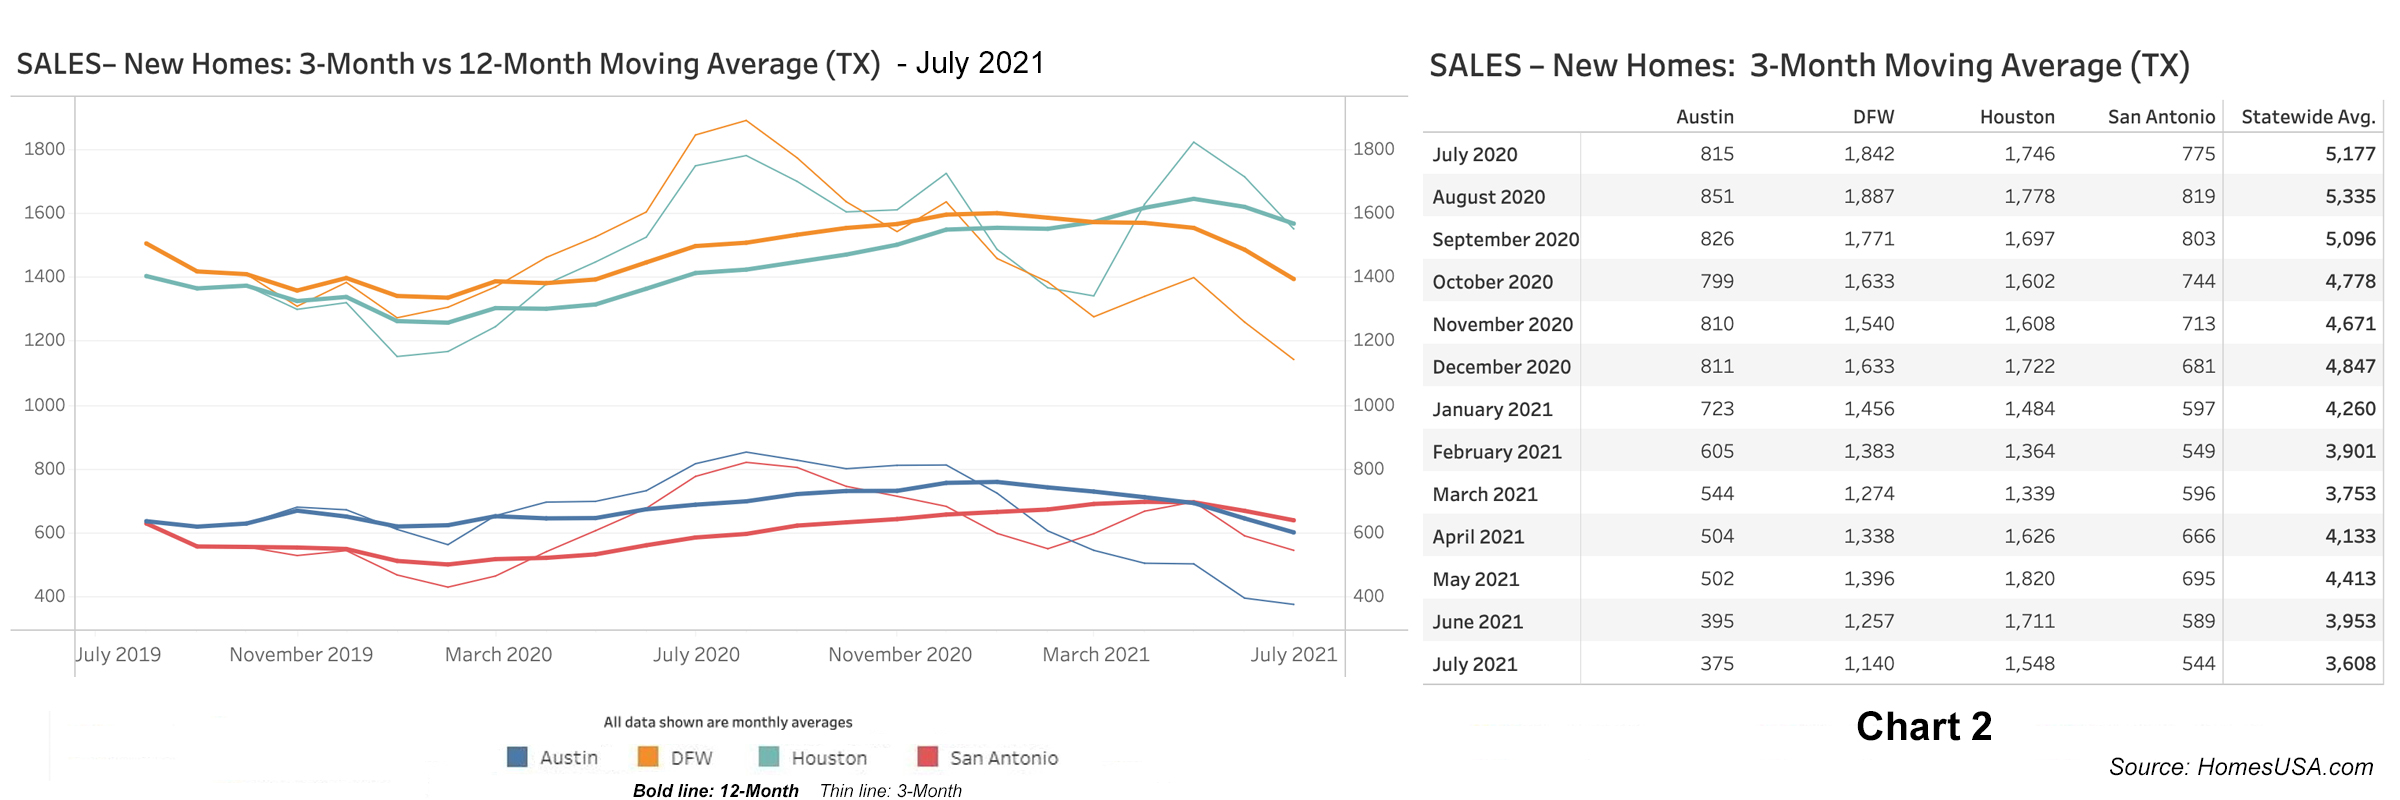 Chart 2: Texas New Home Sales - July 2021